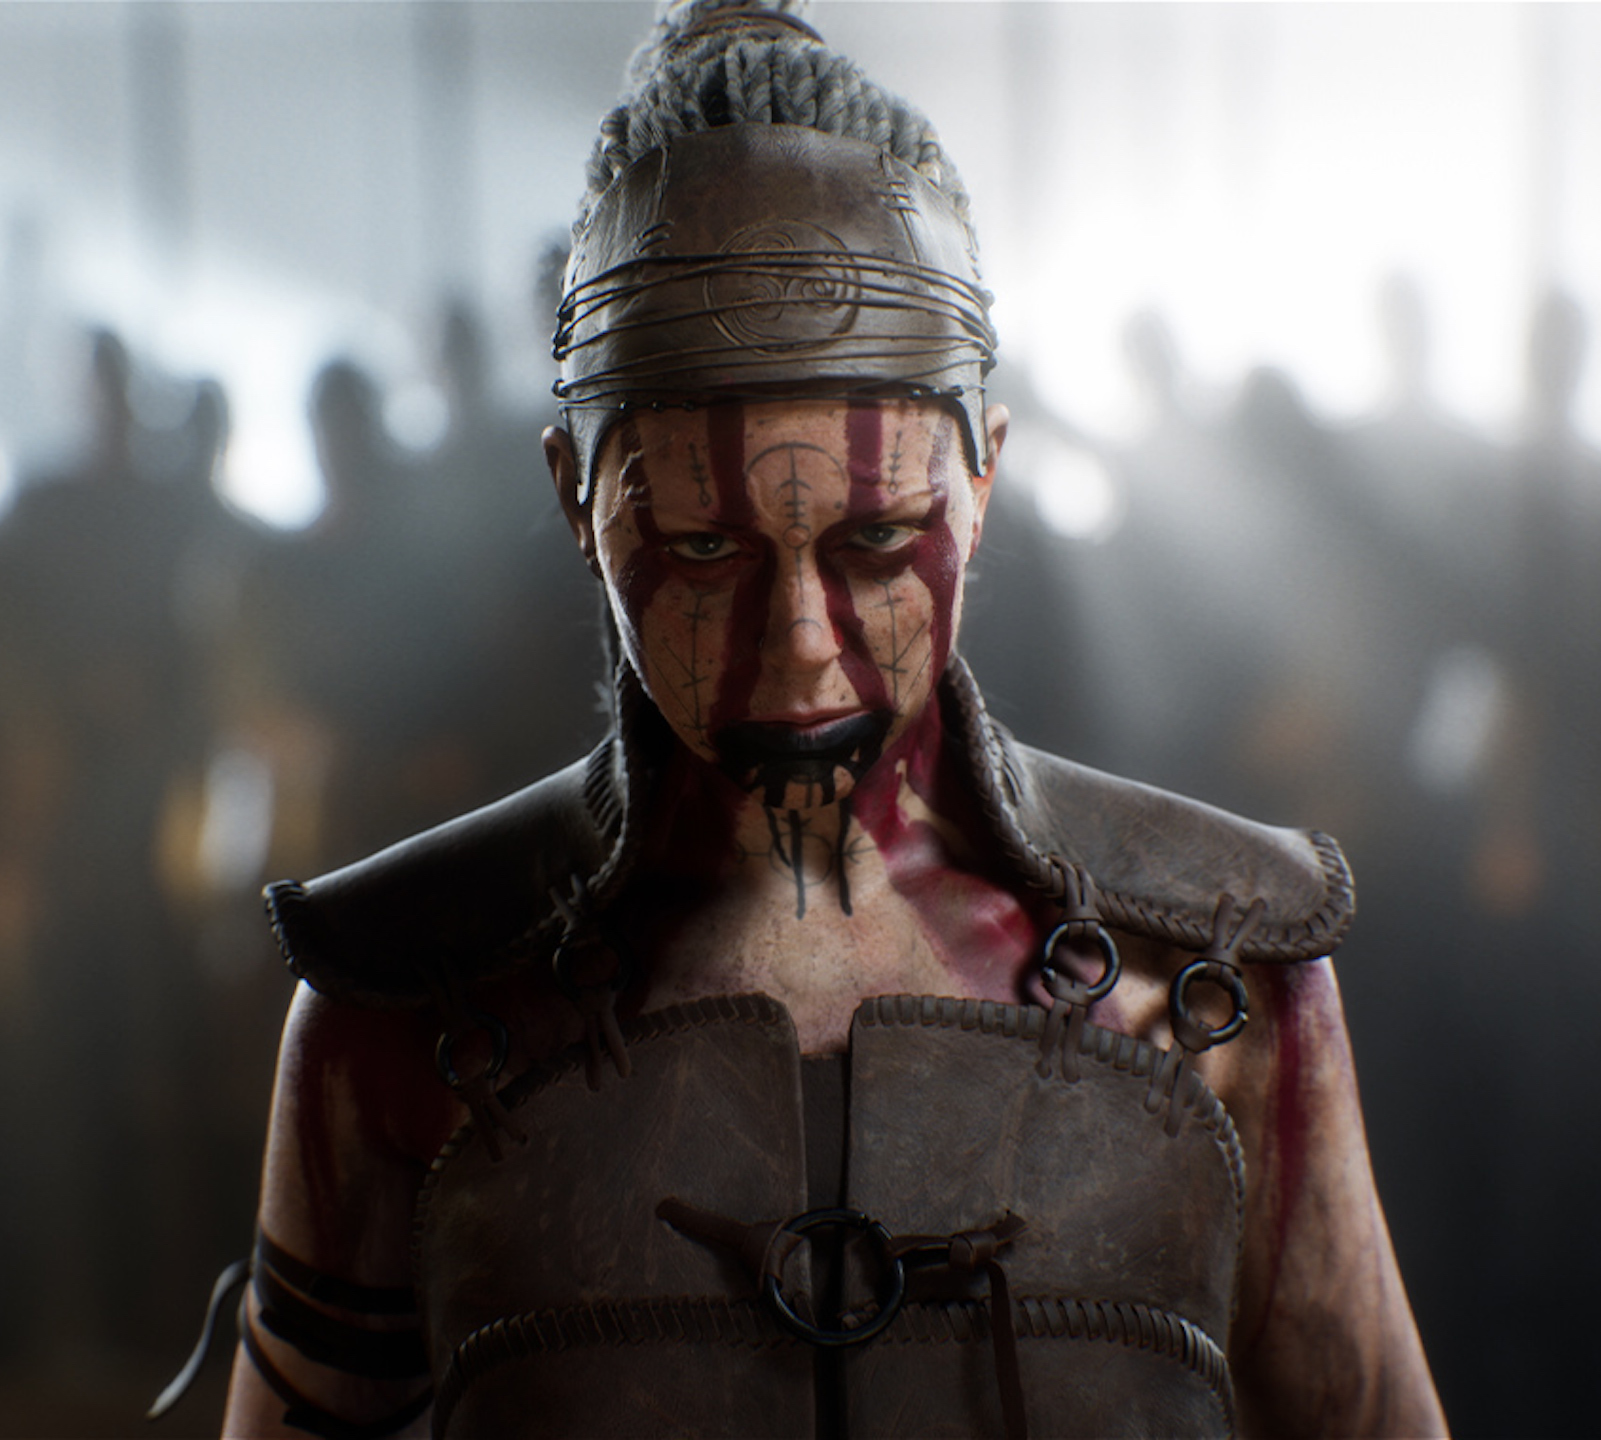 Hellblade 2 seemingly set to release soon as Phil Spencer teases